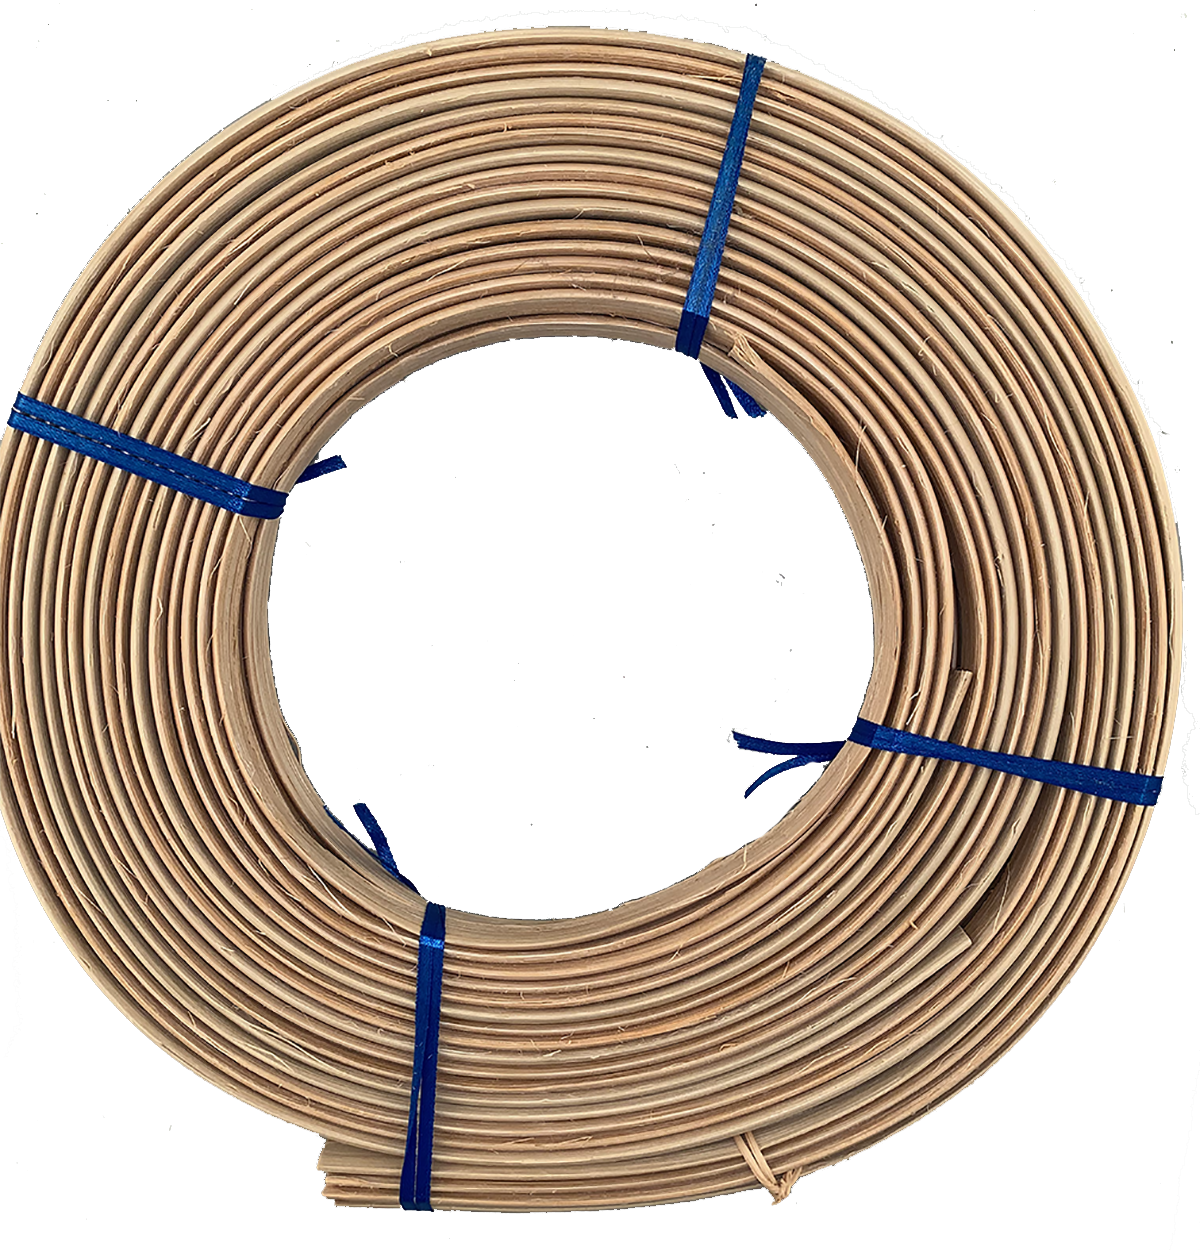 3/8 flat oval reed - 171 ft.